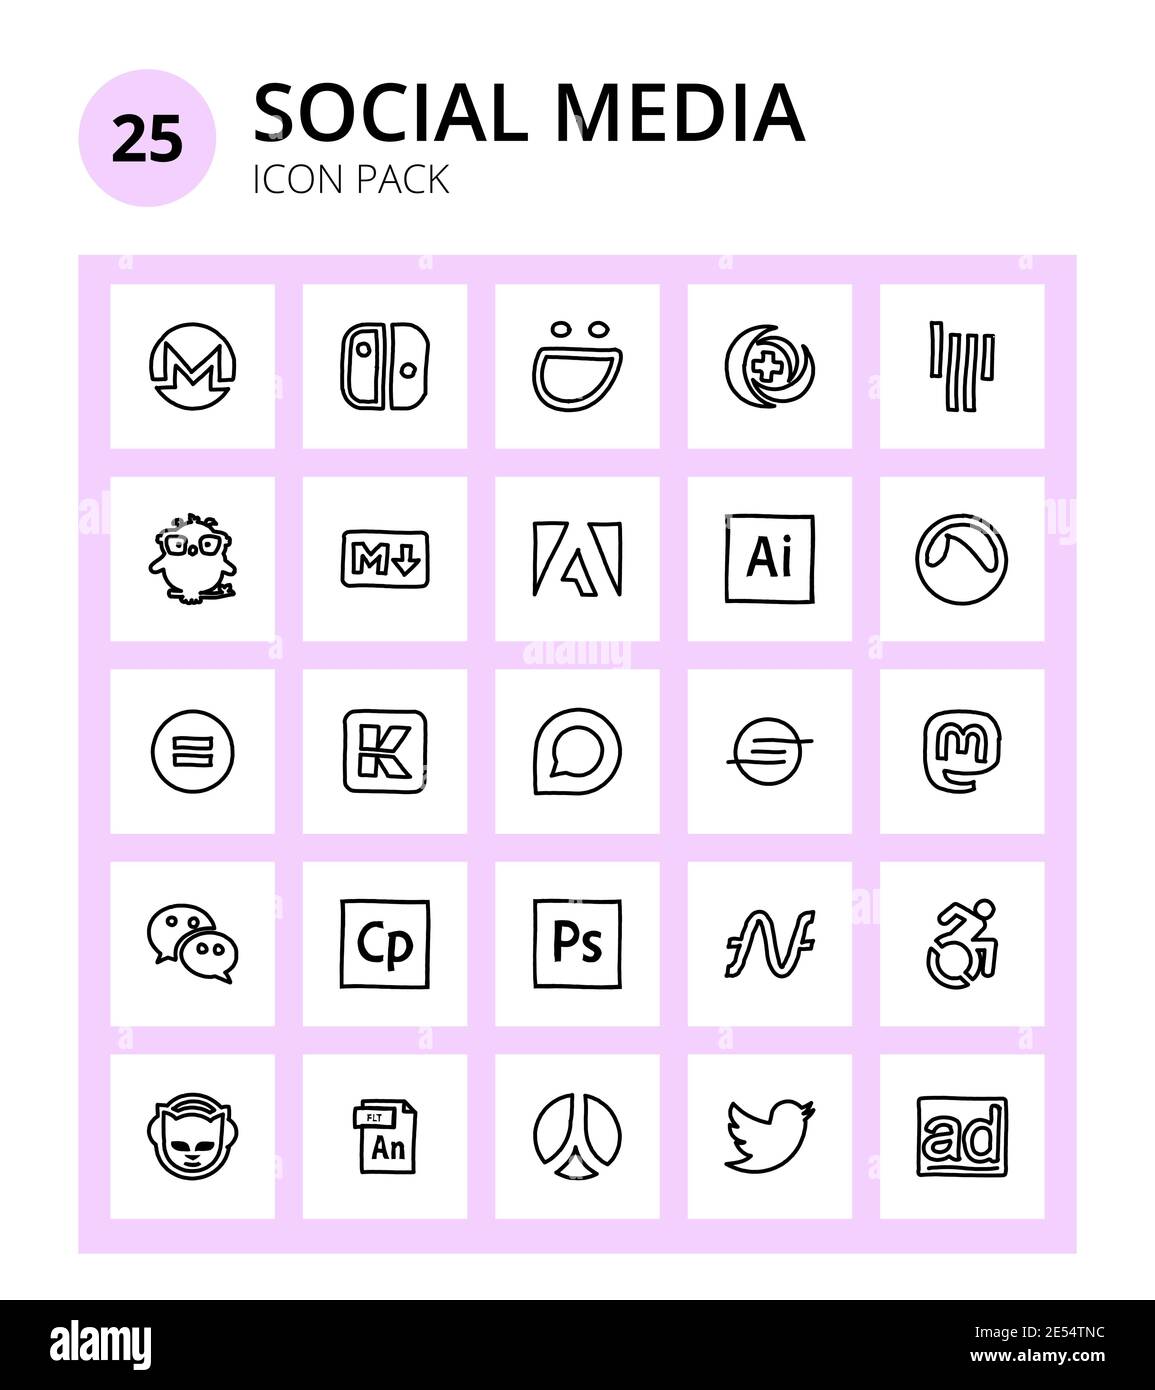 Social Media 25 icons discourse, nd, adobe, commons, grooveshark Editable Vector Design Elements Stock Vector